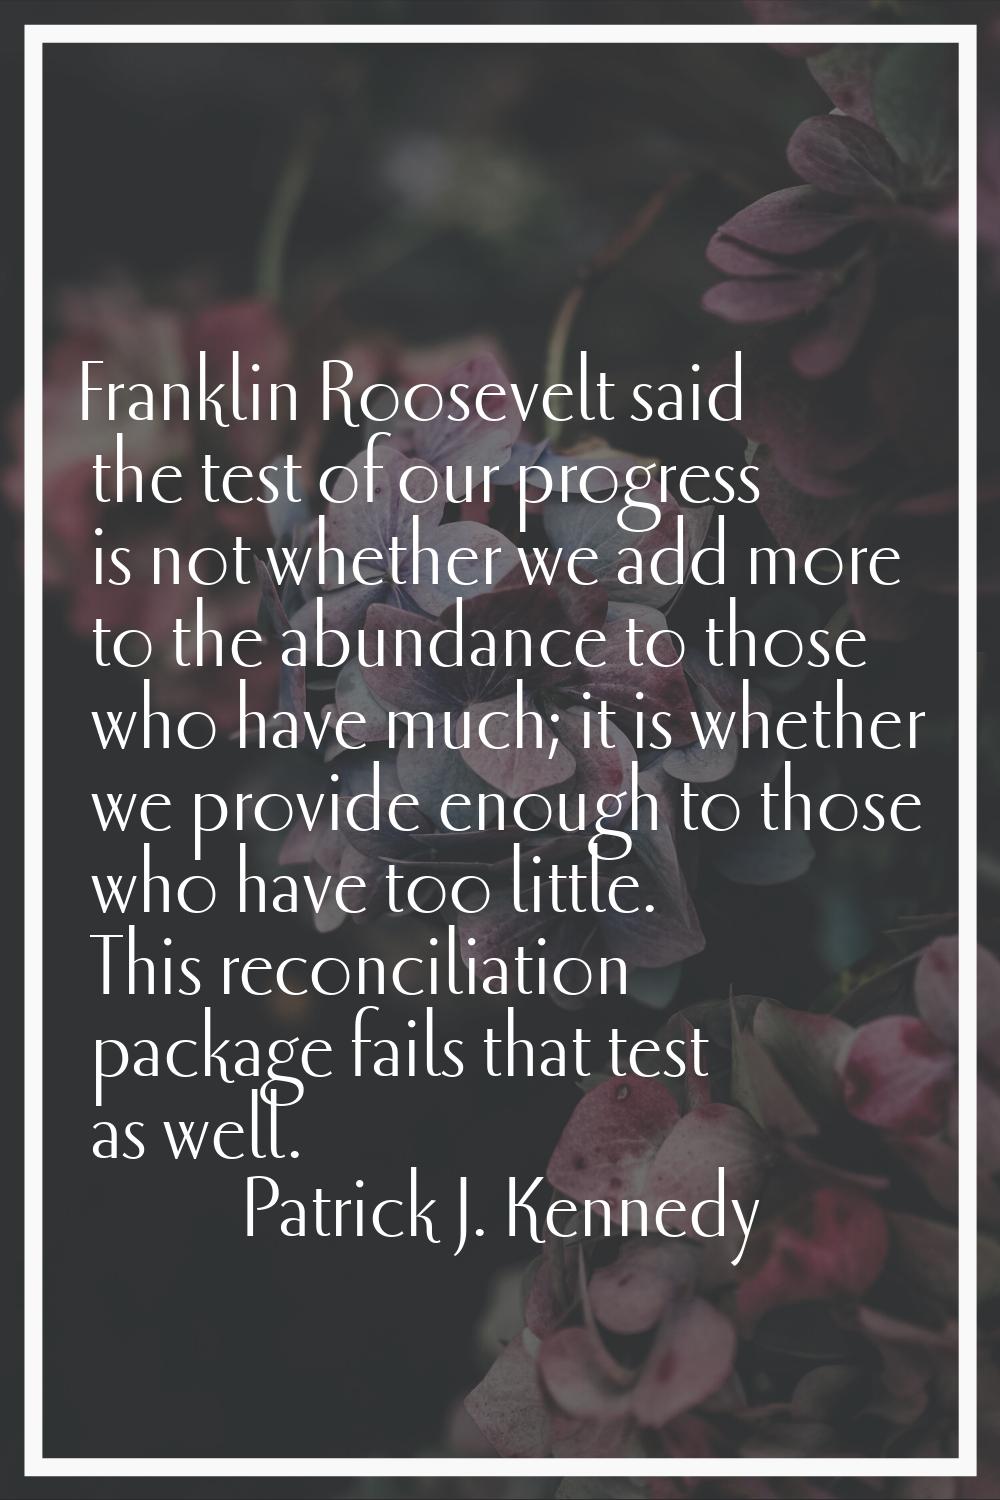 Franklin Roosevelt said the test of our progress is not whether we add more to the abundance to tho